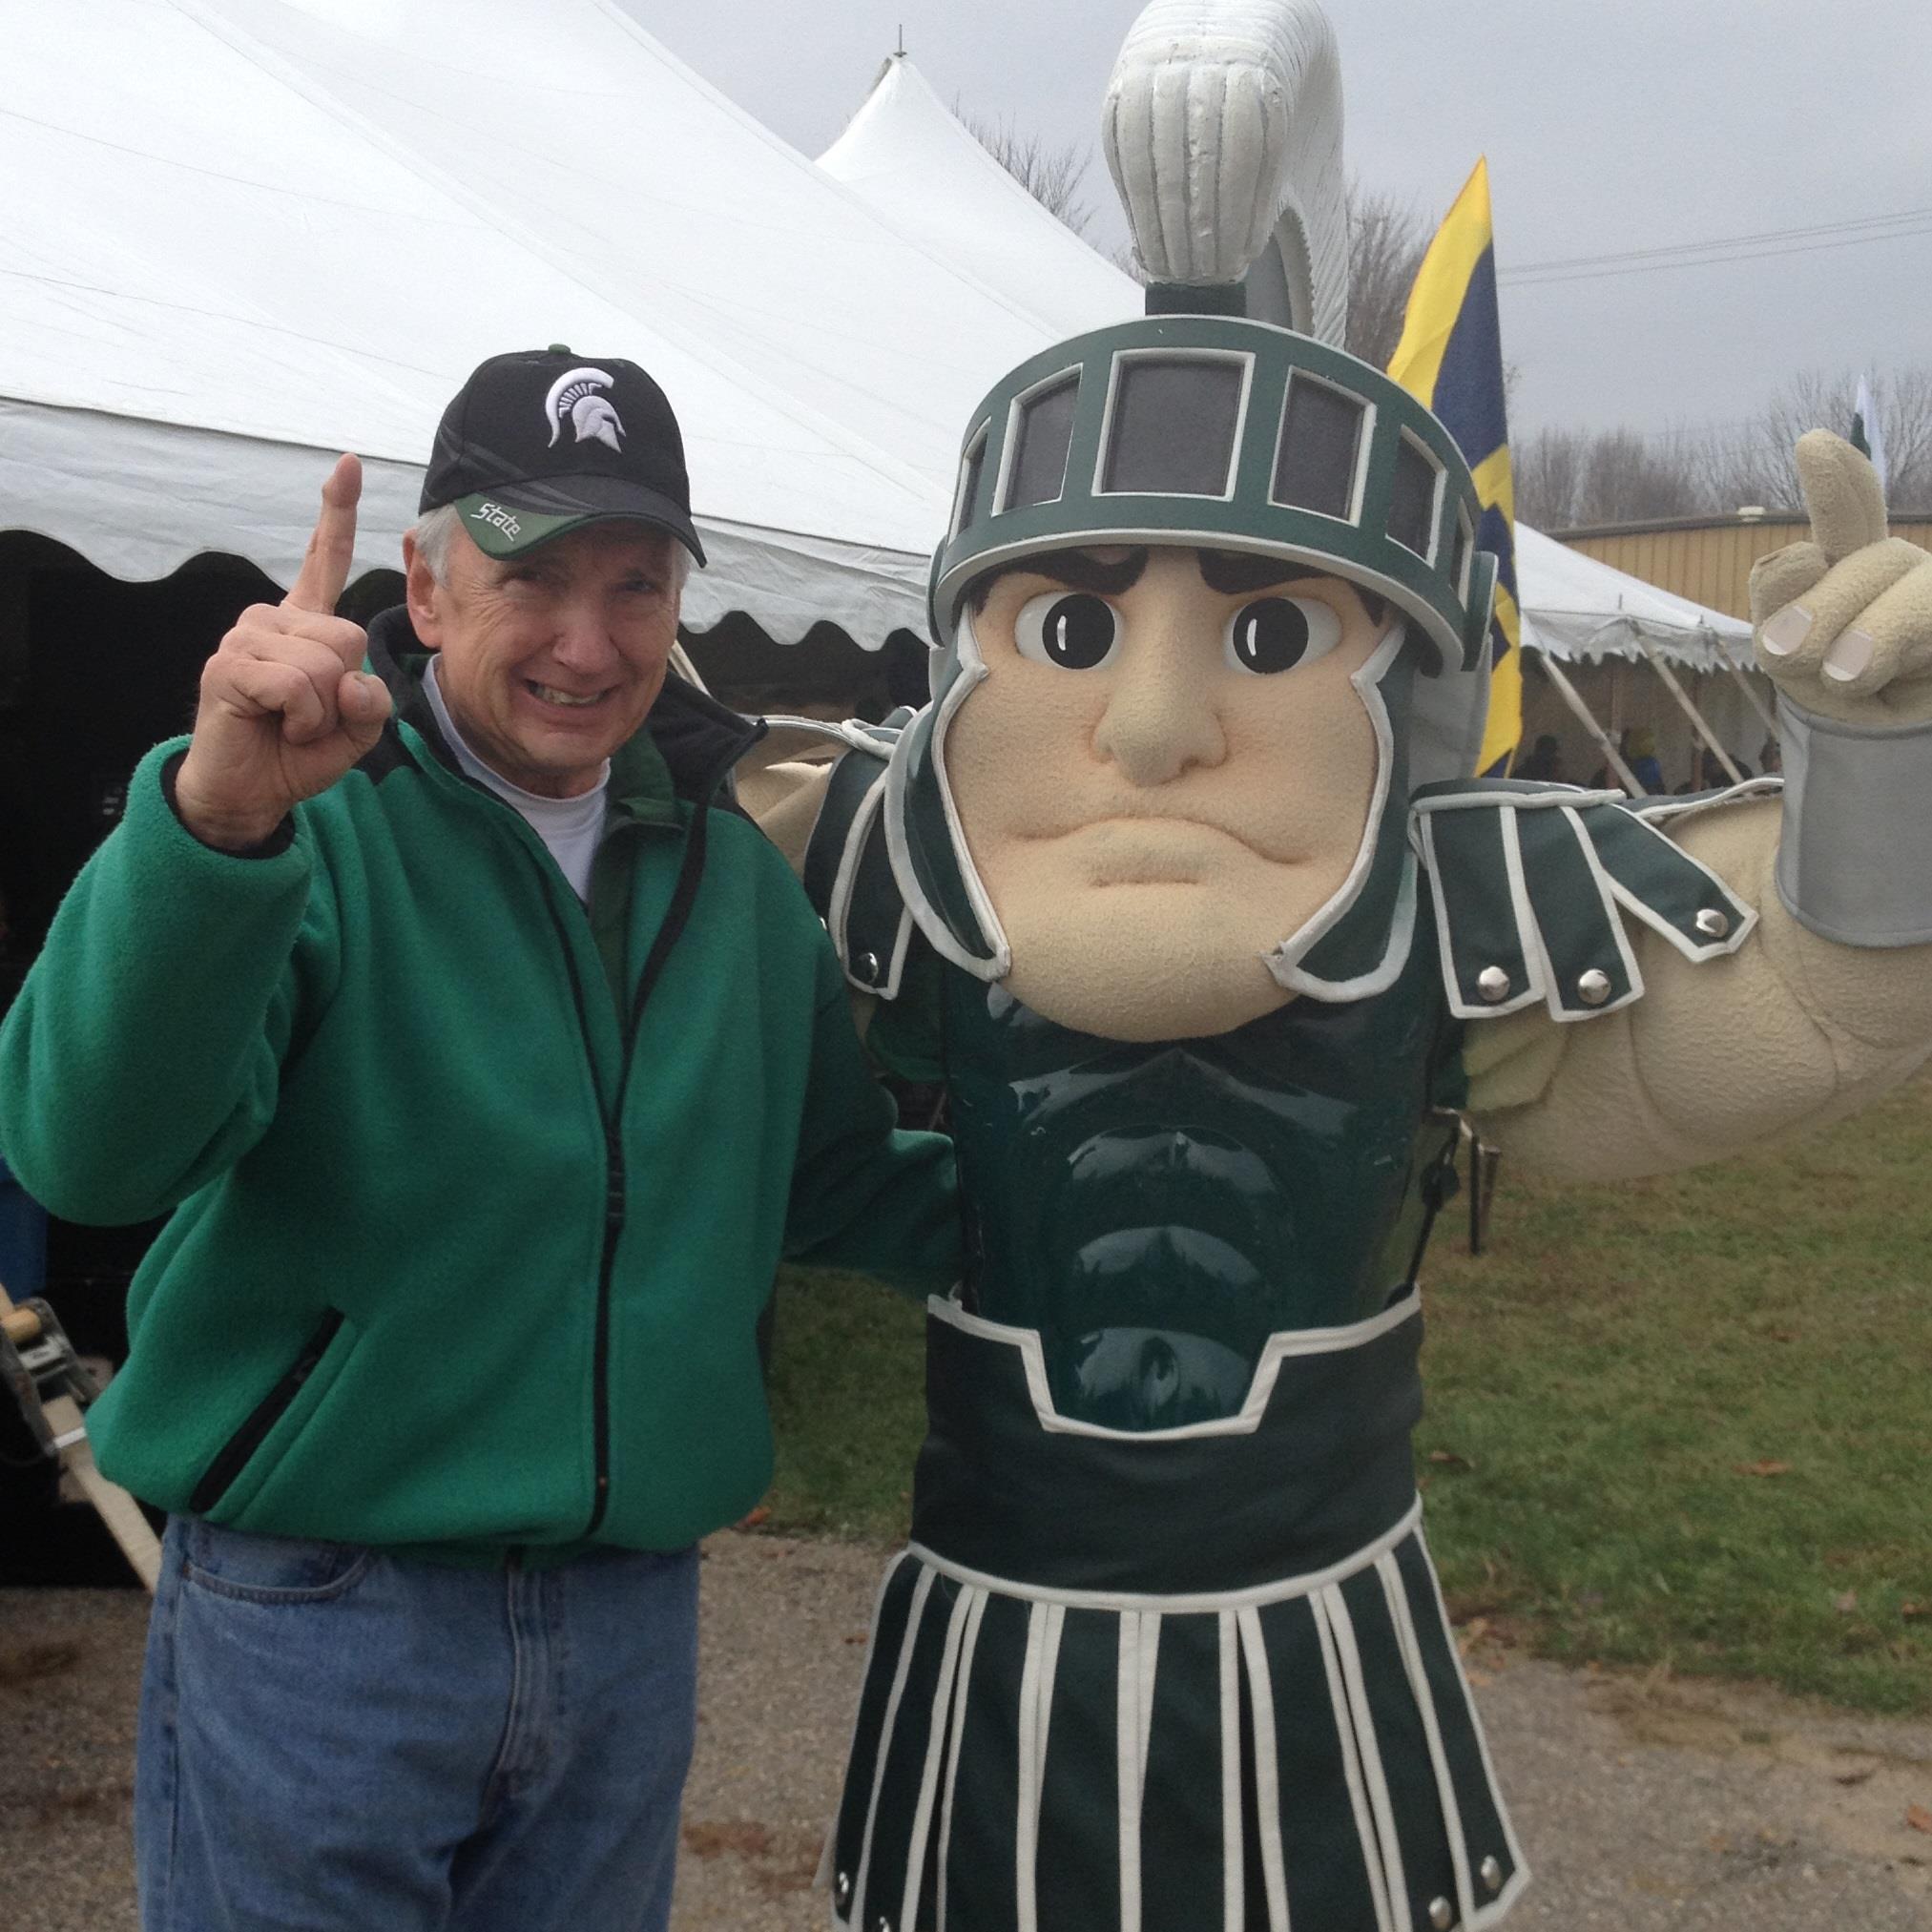 Chiropractor, husband, MSU Spartan fan - working each day to provide better health for my patients.